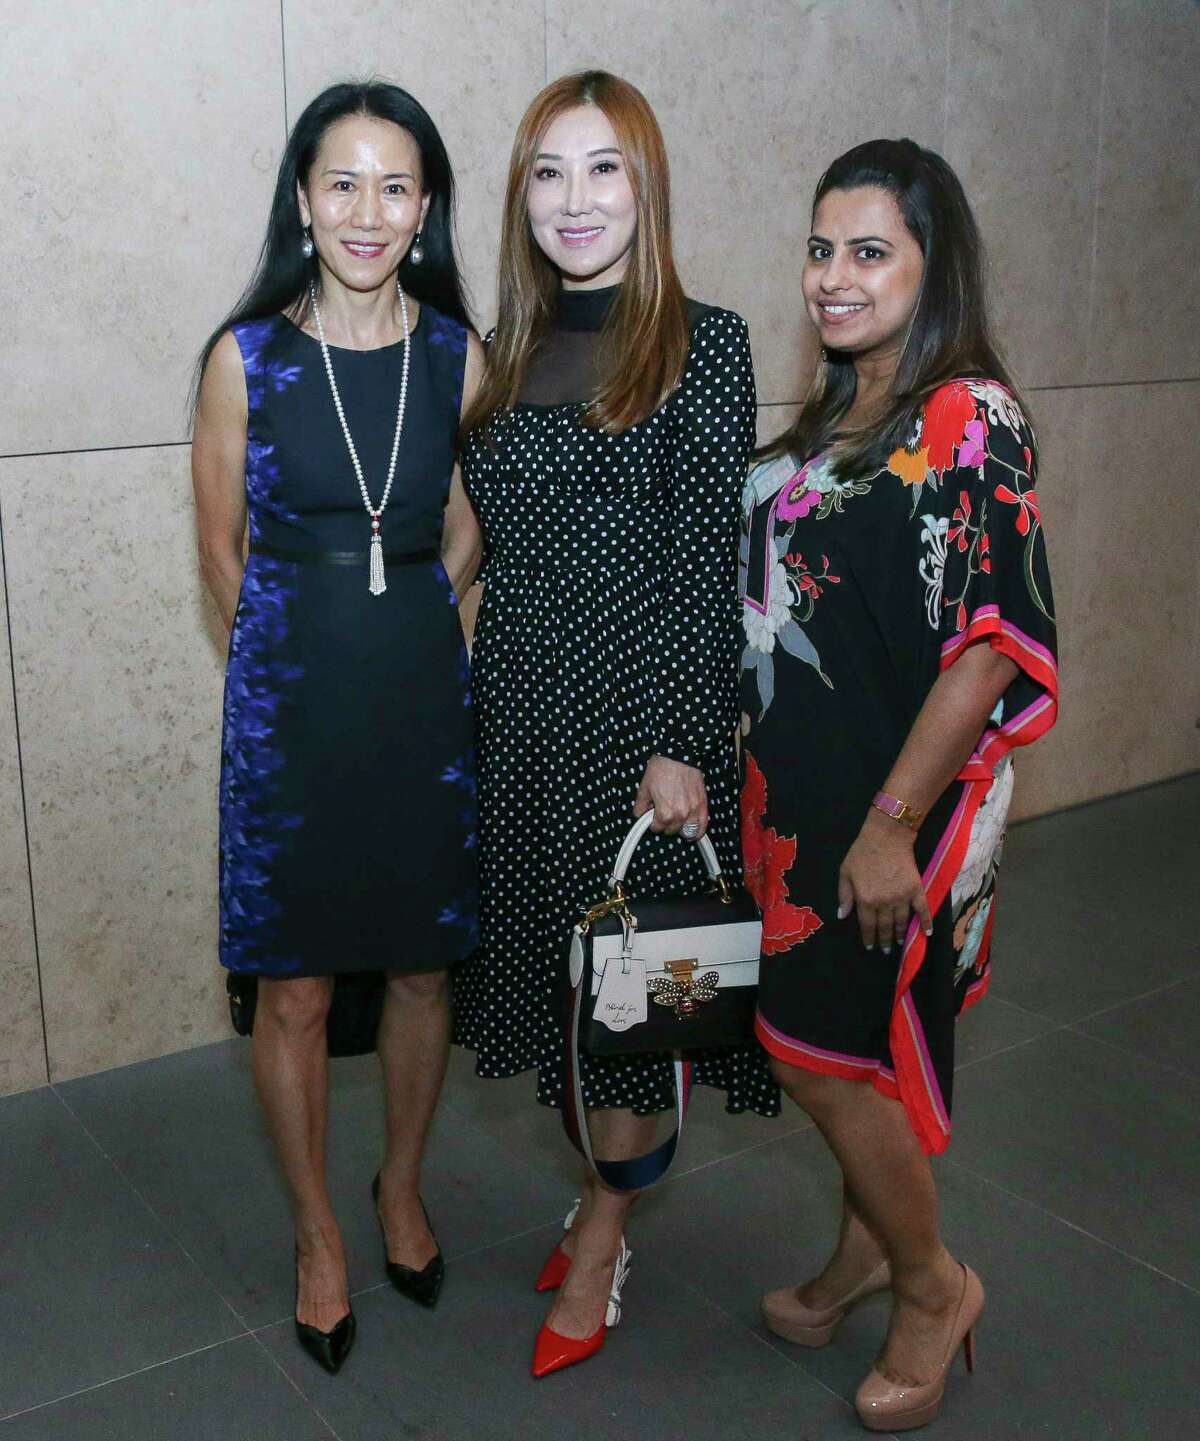 Y. Ping Sun, from left, Mandy Kao and Ruchi Mukherjee pose for a photograph at the Women in Culinary Arts Luncheon at Asia Society Texas Center on Thursday, Sept. 13, 2018, in Houston.